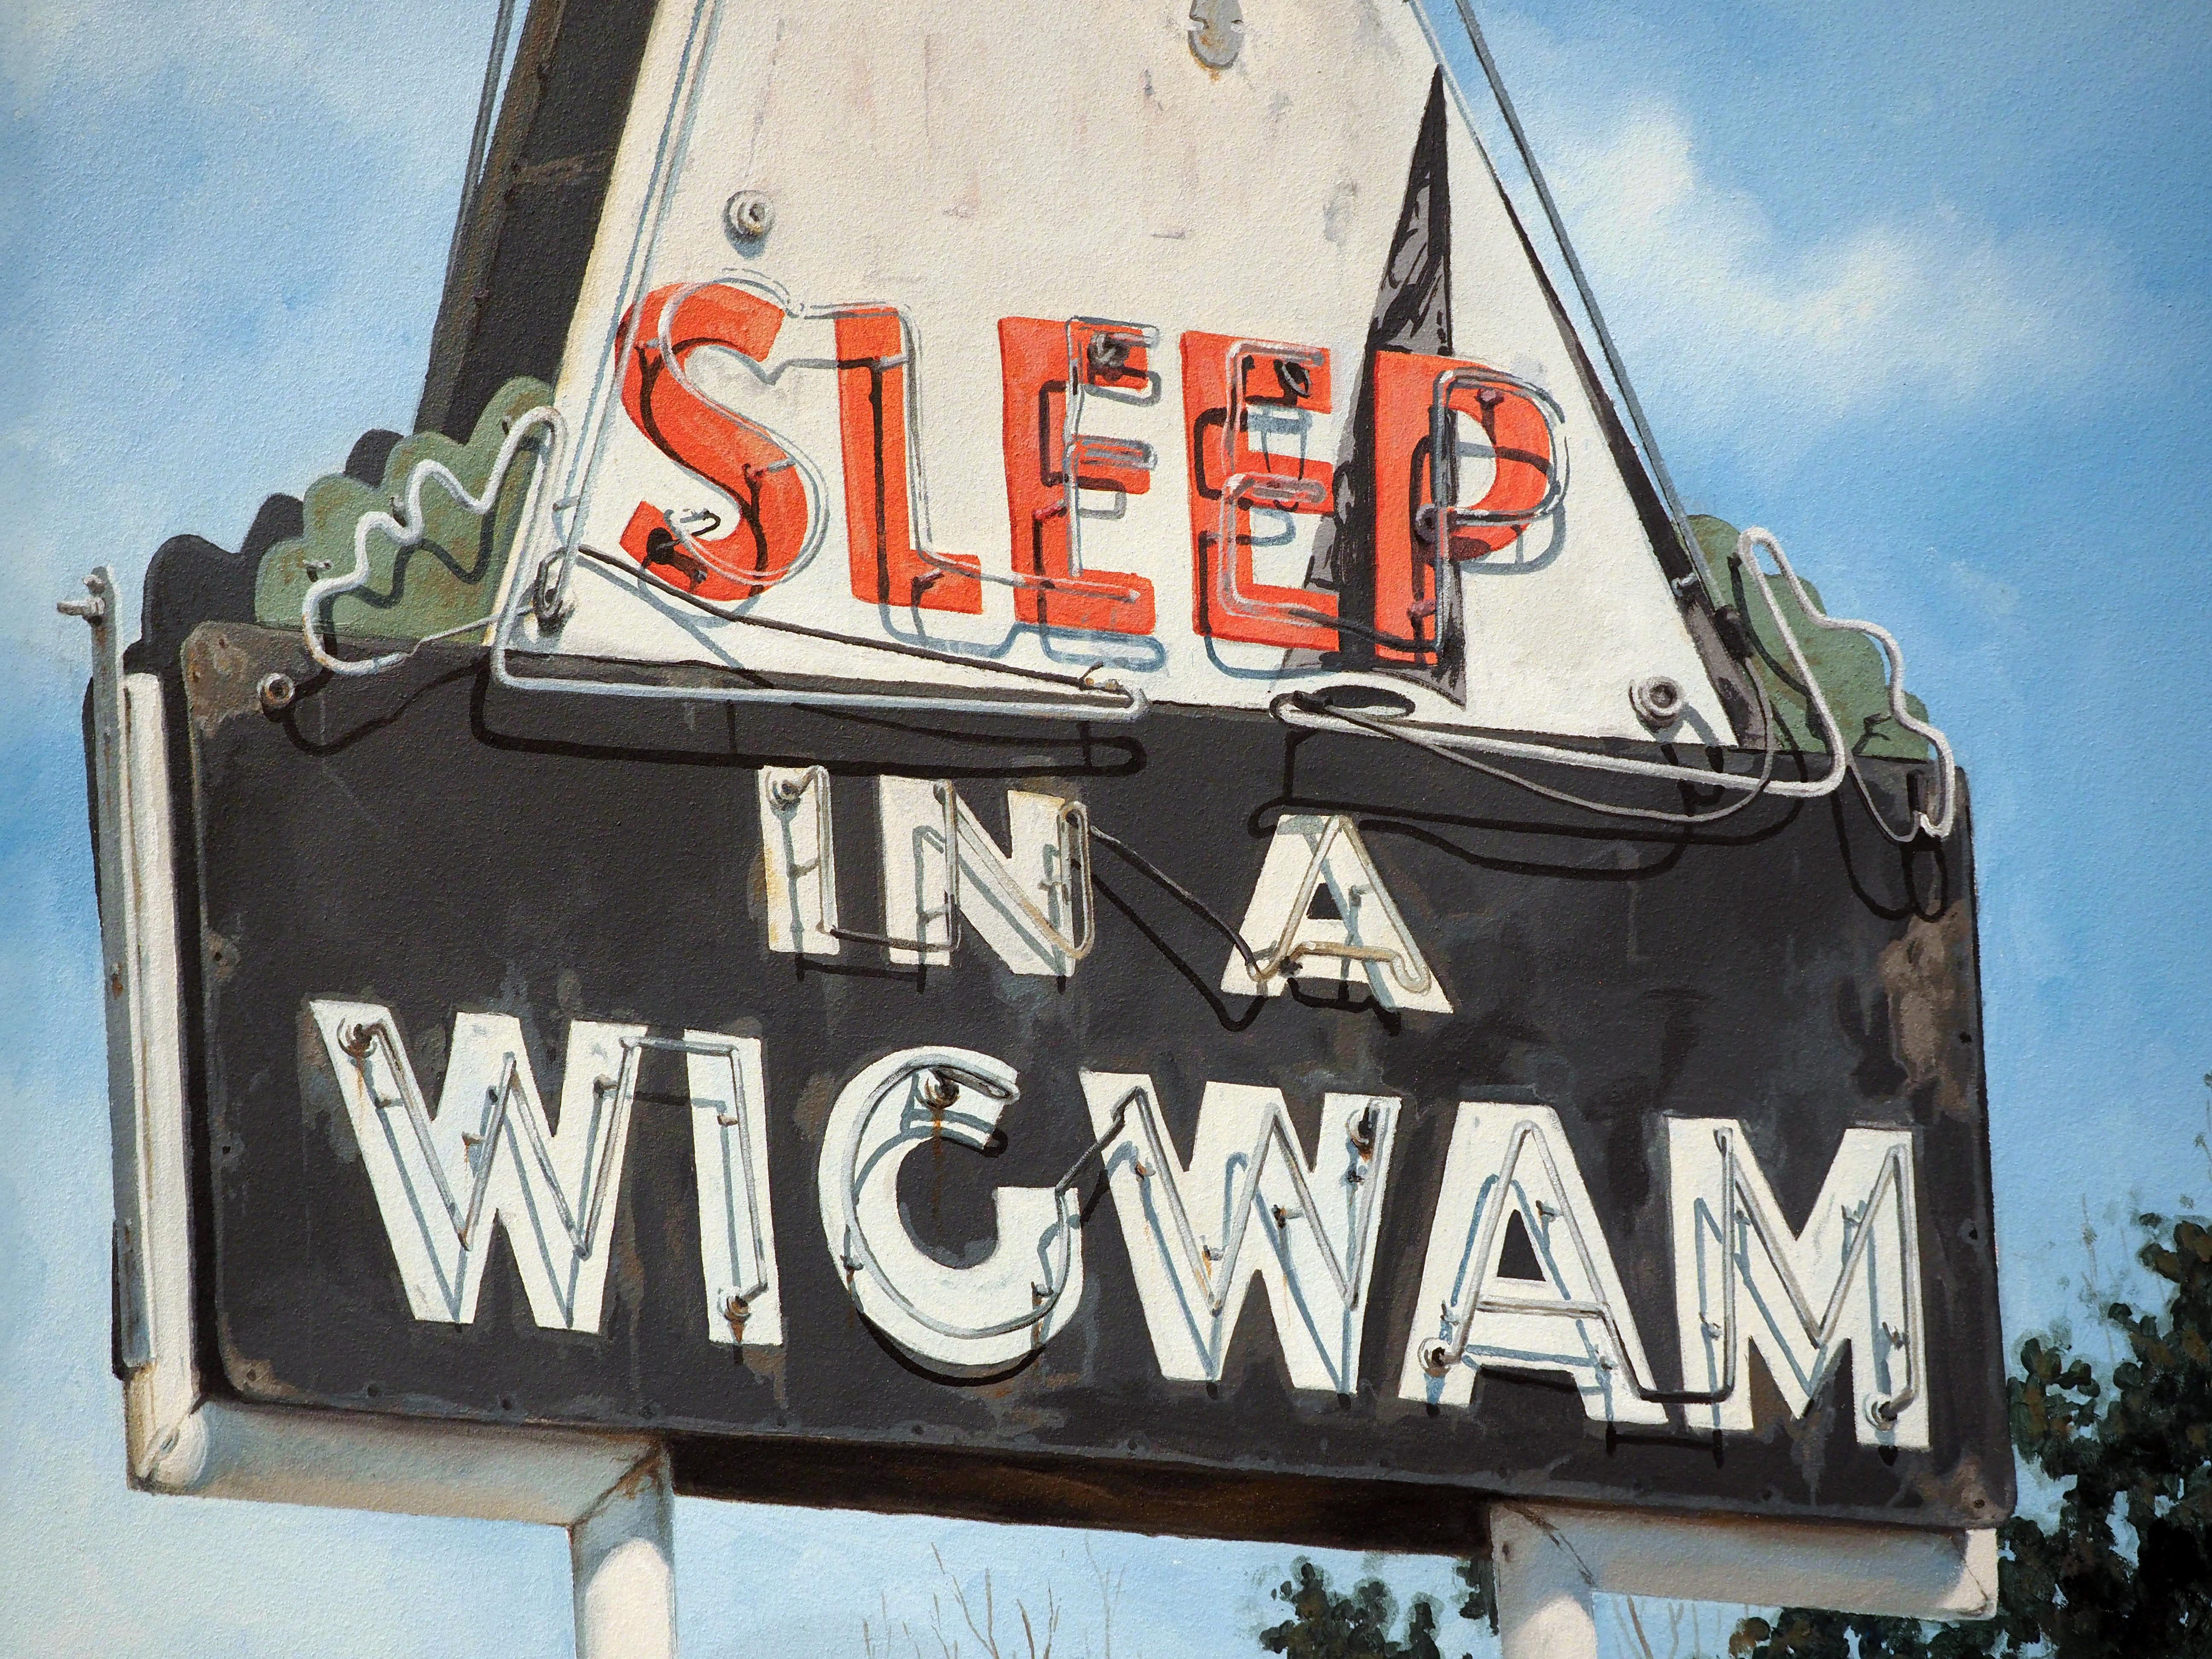 Sleep in a Wigwam depicts the earliest surviving location of the historic Wigwam Village Motels. Built in 1937, this iconic Route 66 neon sign, and motel, is still located and taking reservations in Cave City, KY. Sharp's high attention to detail is